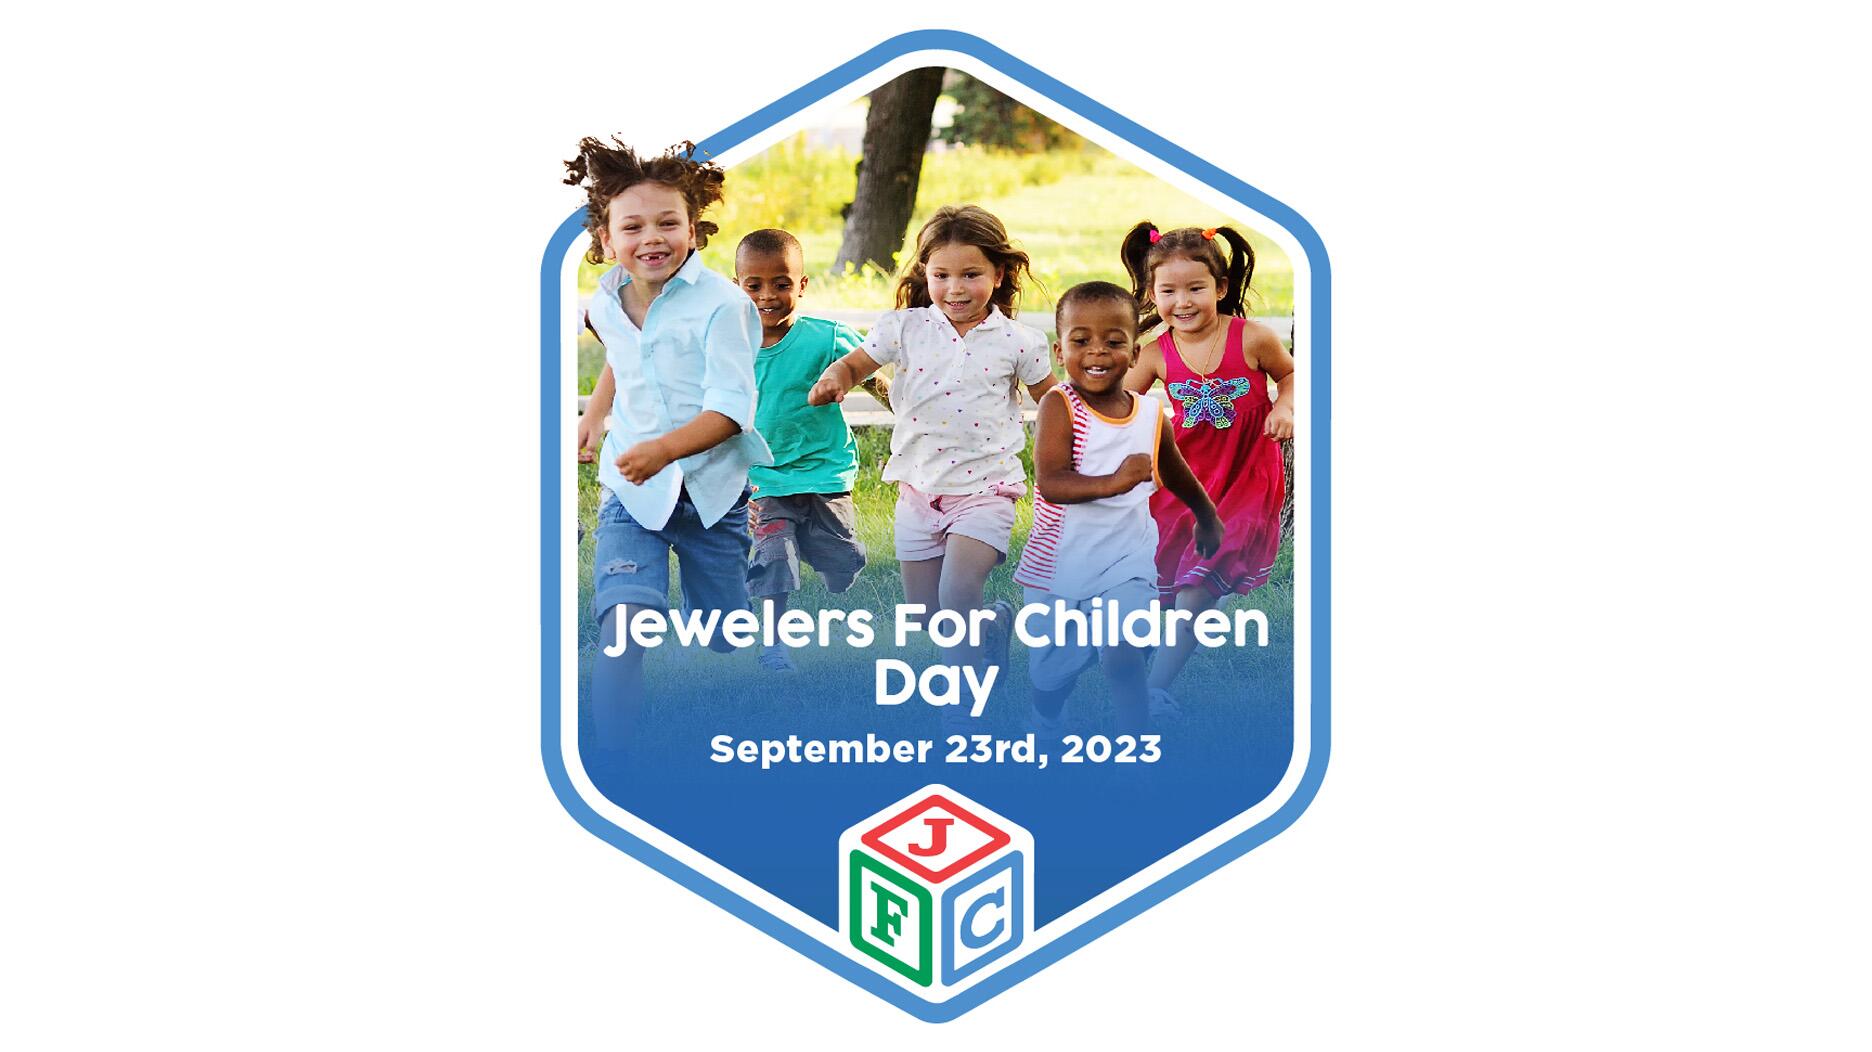 Jewelers for Children Day logo